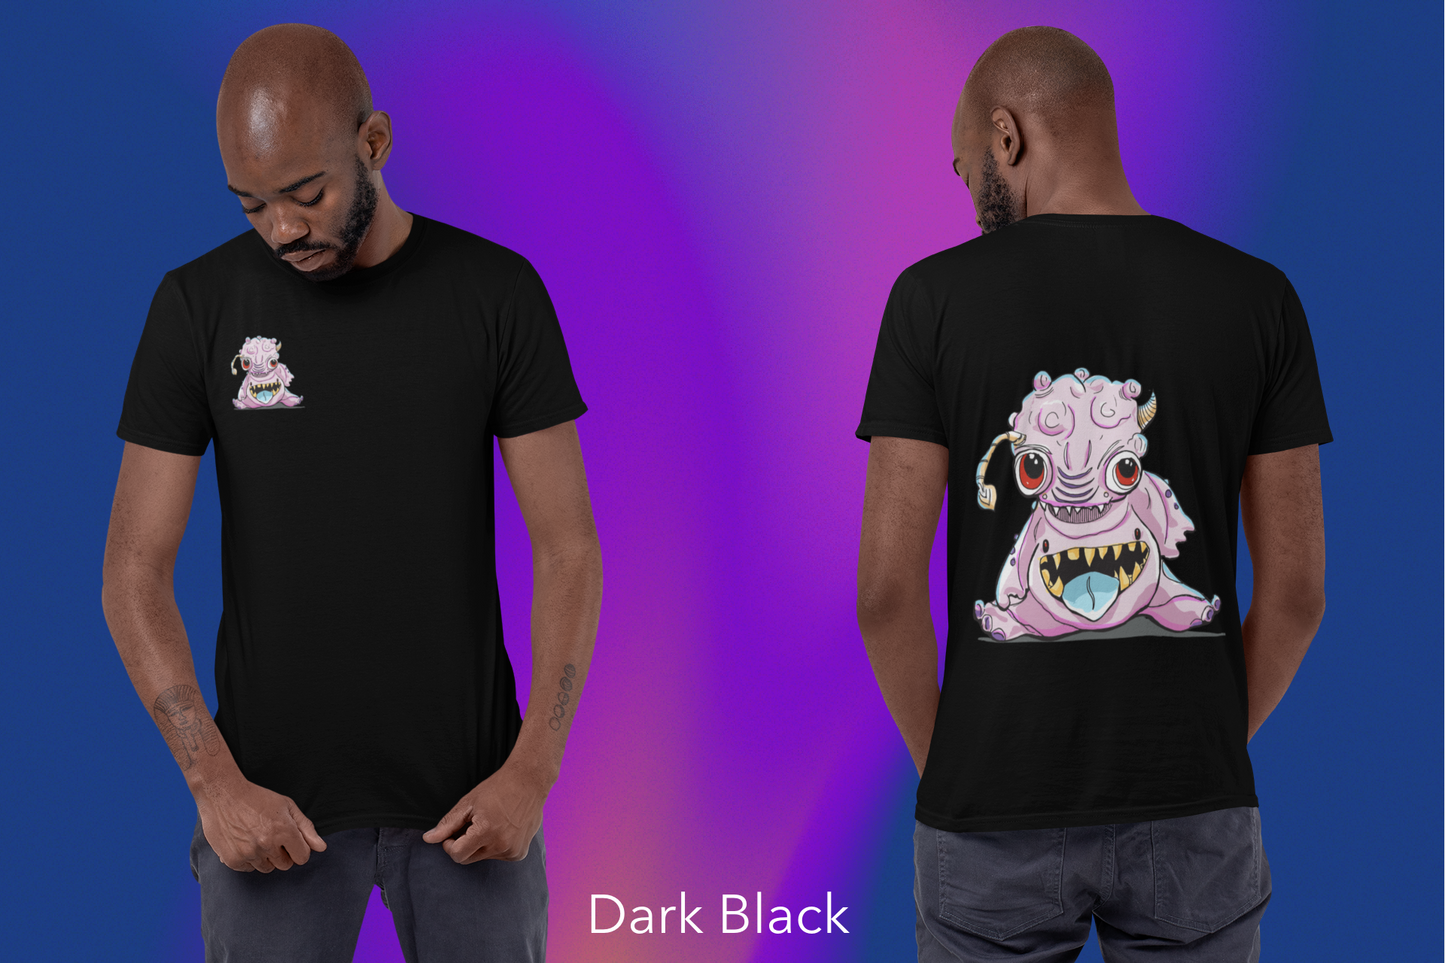 front and back shot of a dark skinned man in a black shirt. With a pink bublegum looking alien creature on the front and back of the shirt The creature full back shirt display and small "pocket" display on the front